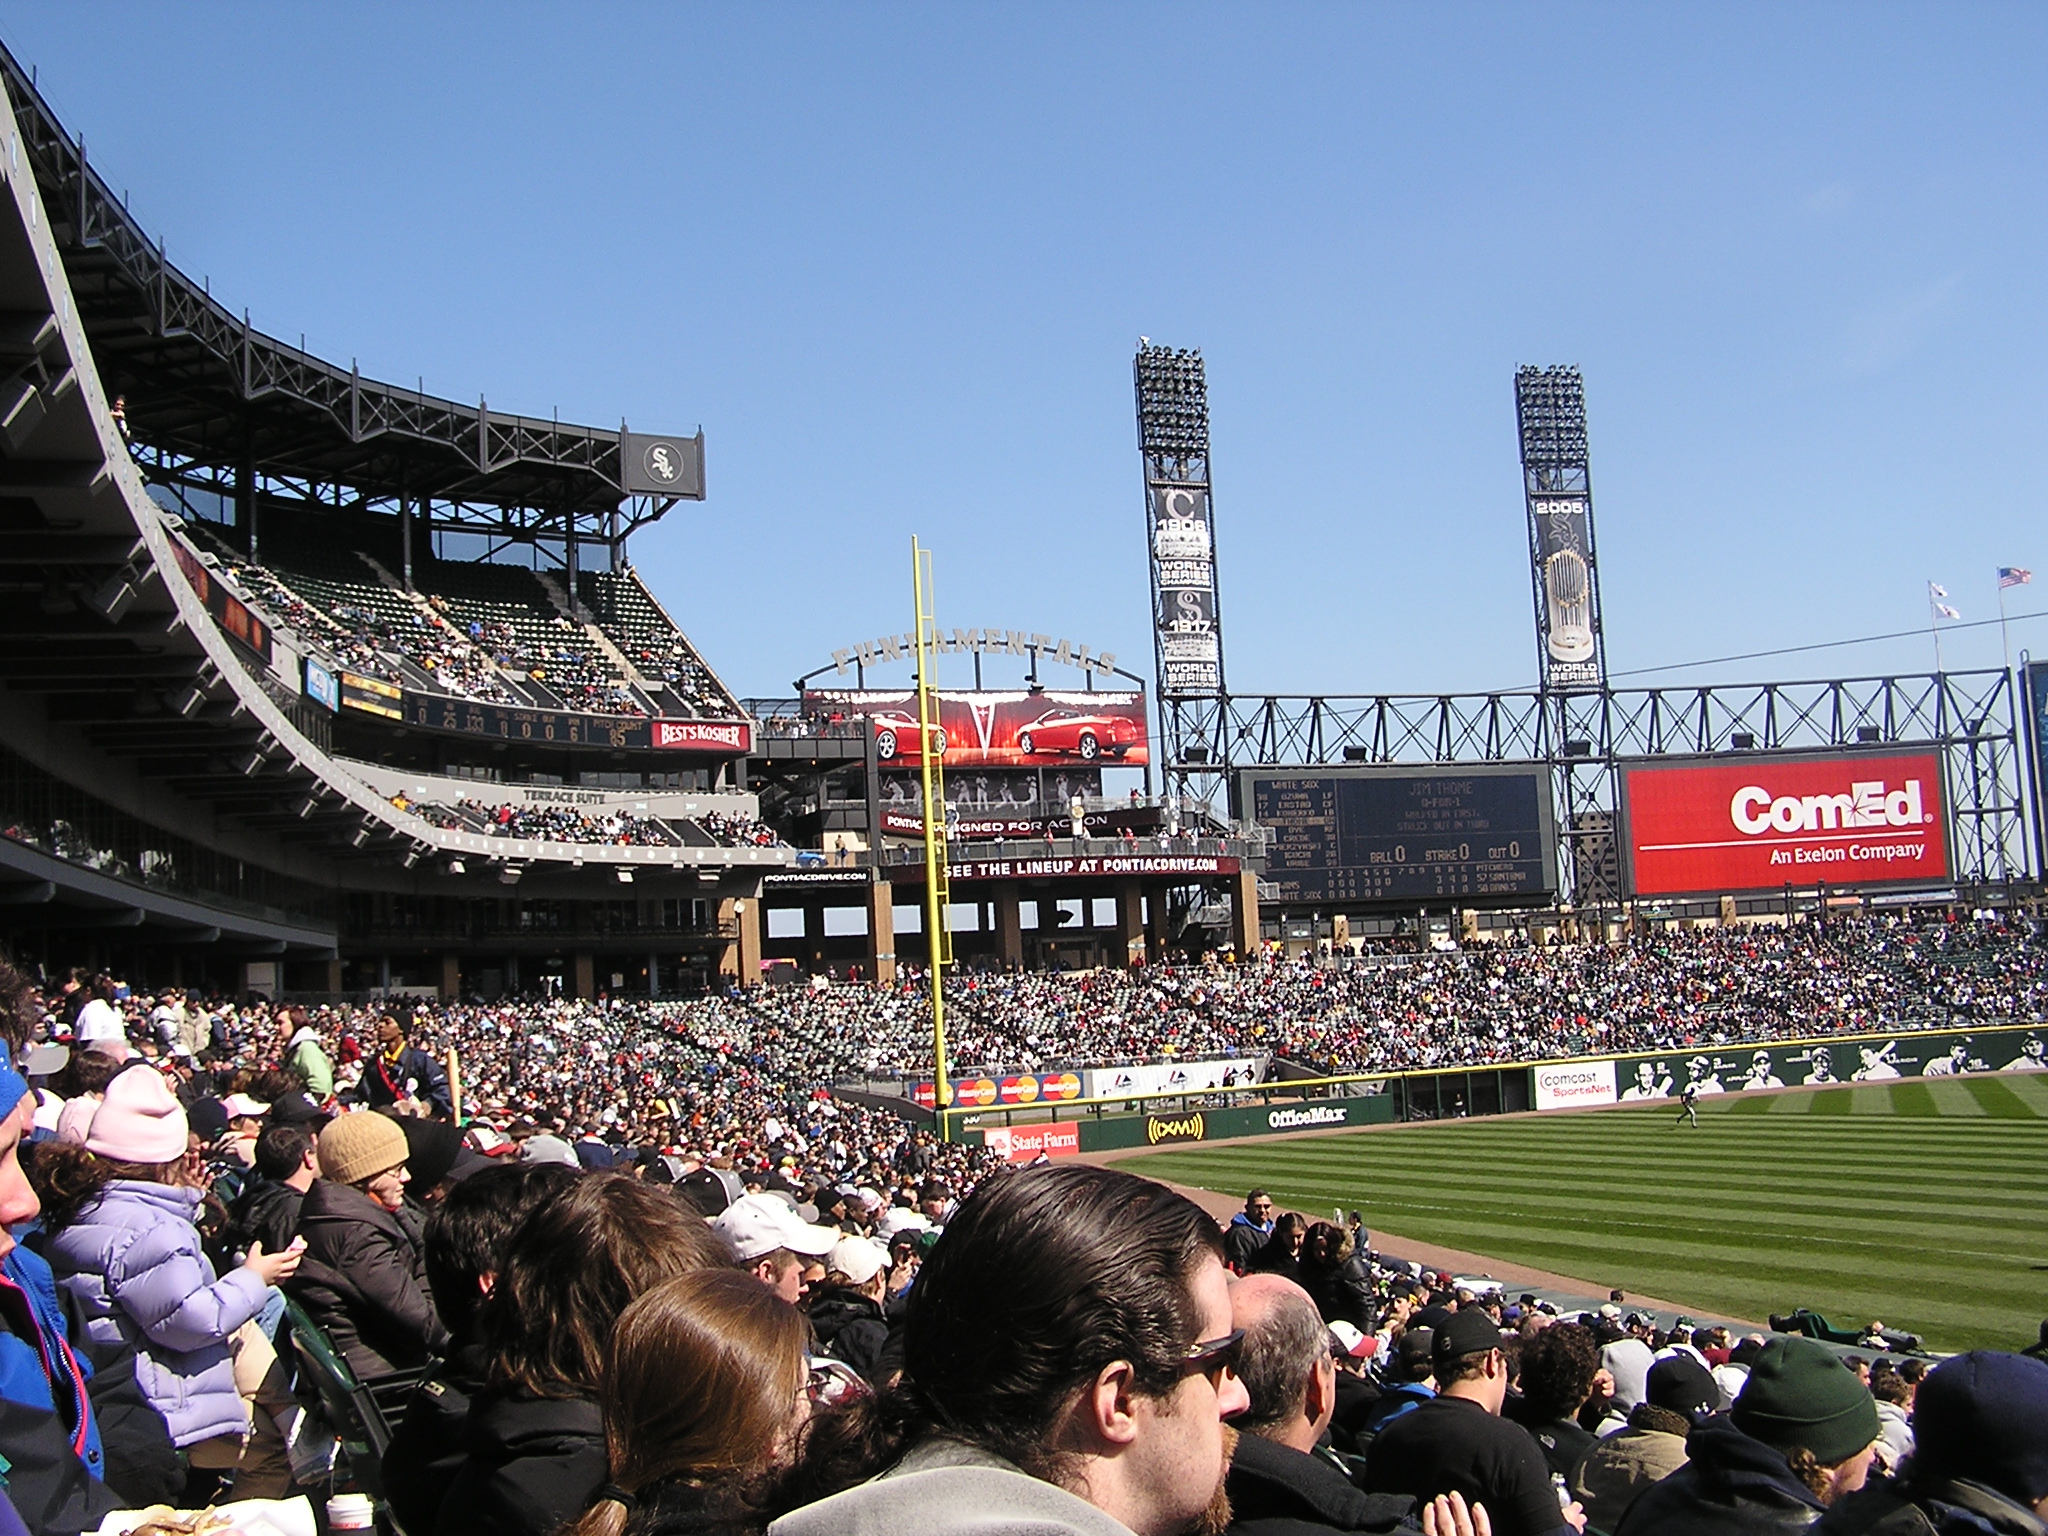 Looking back to the Left Field Foul pole